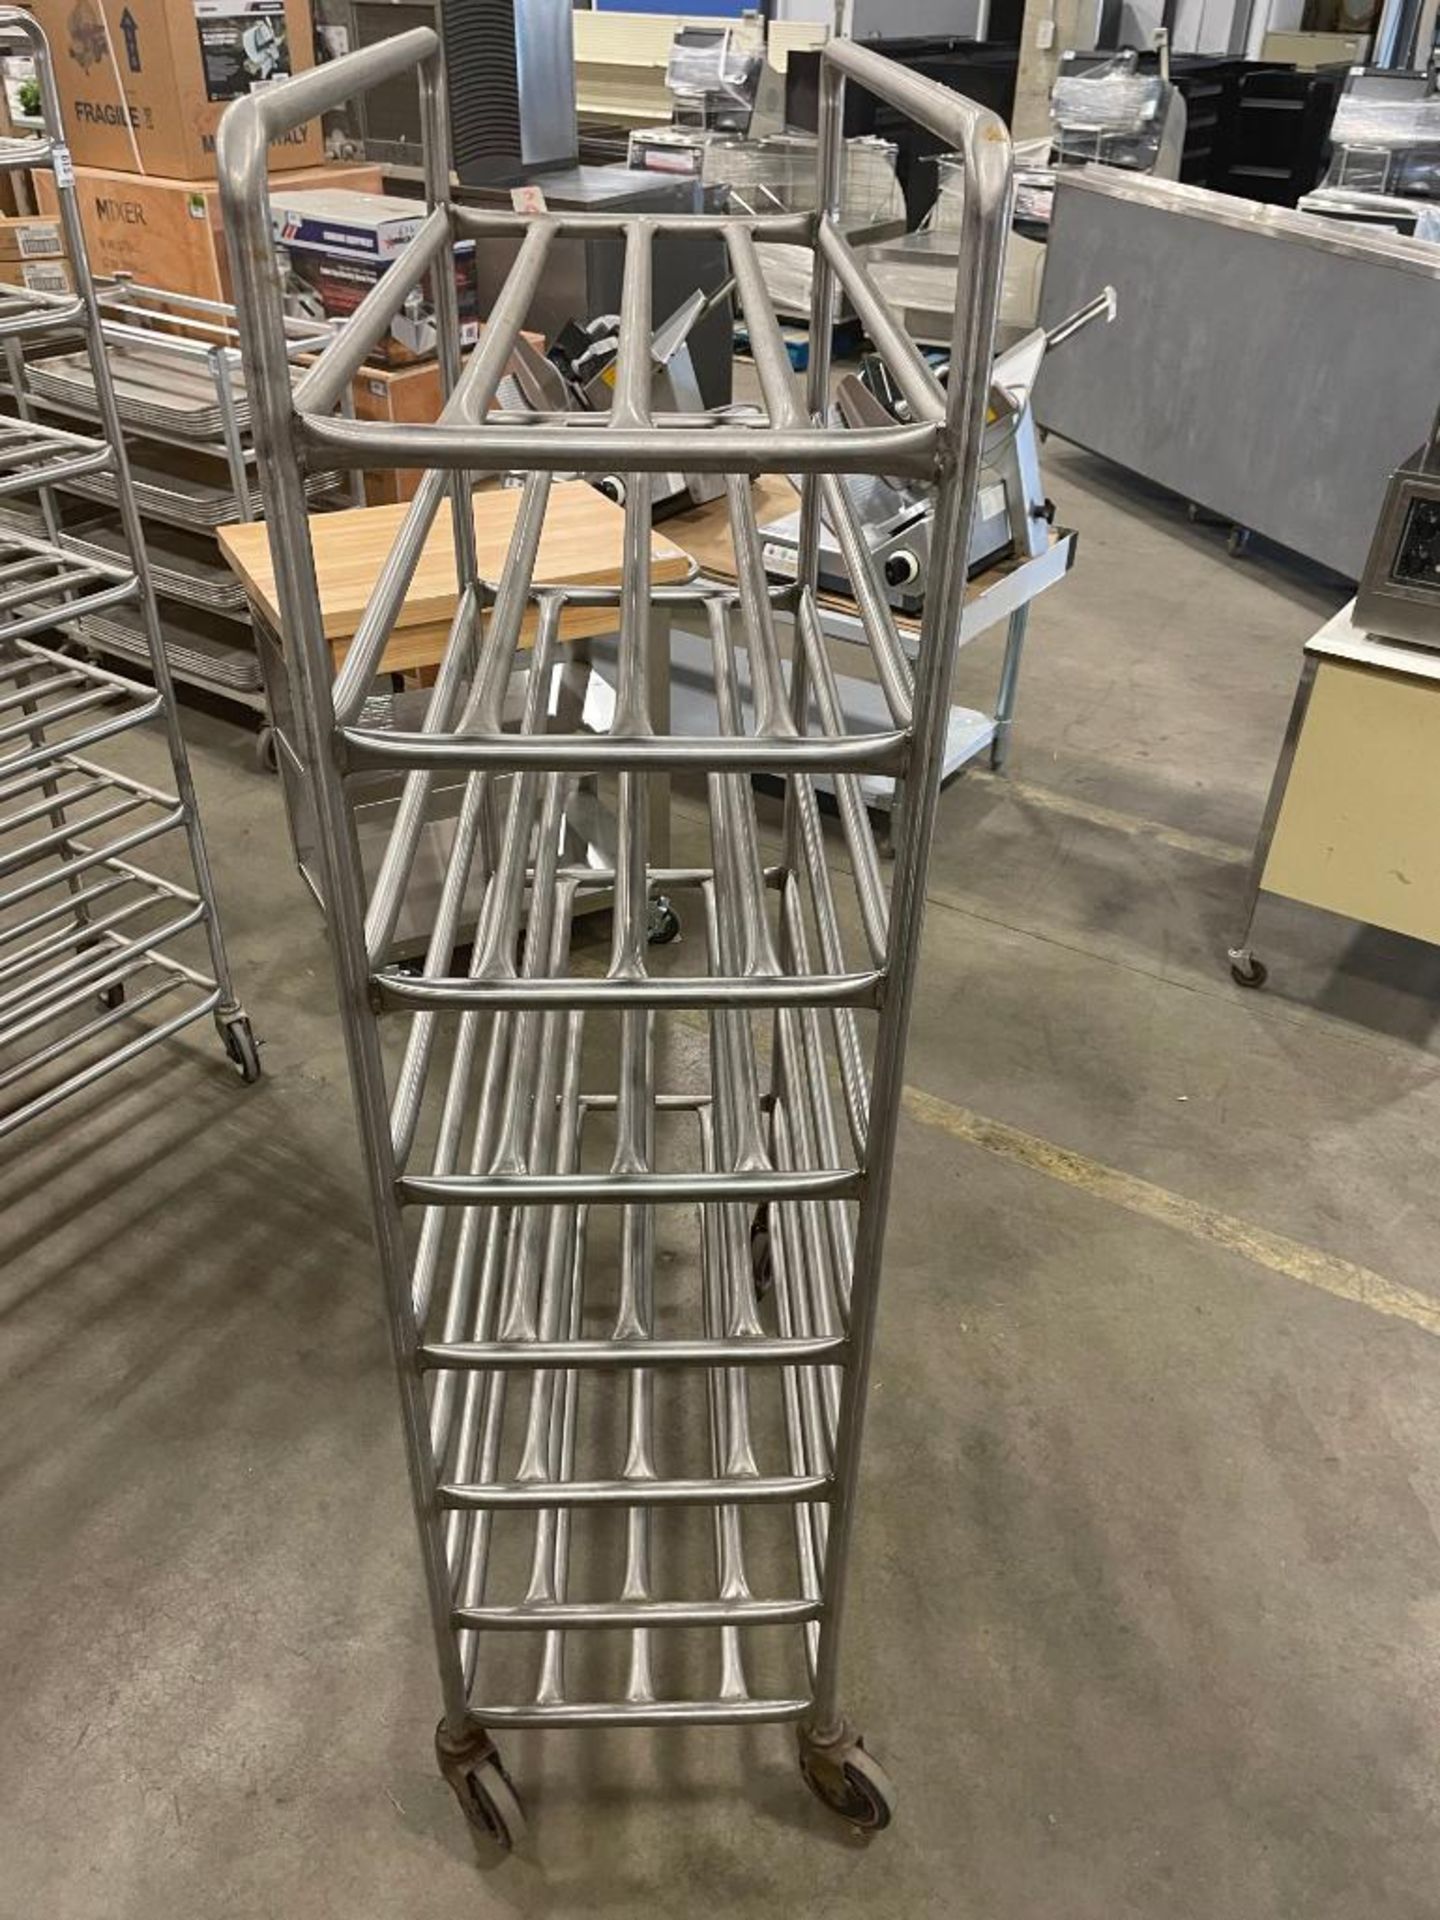 8 TIER STAINLESS STEEL MOBILE PLATTER CART - Image 2 of 4